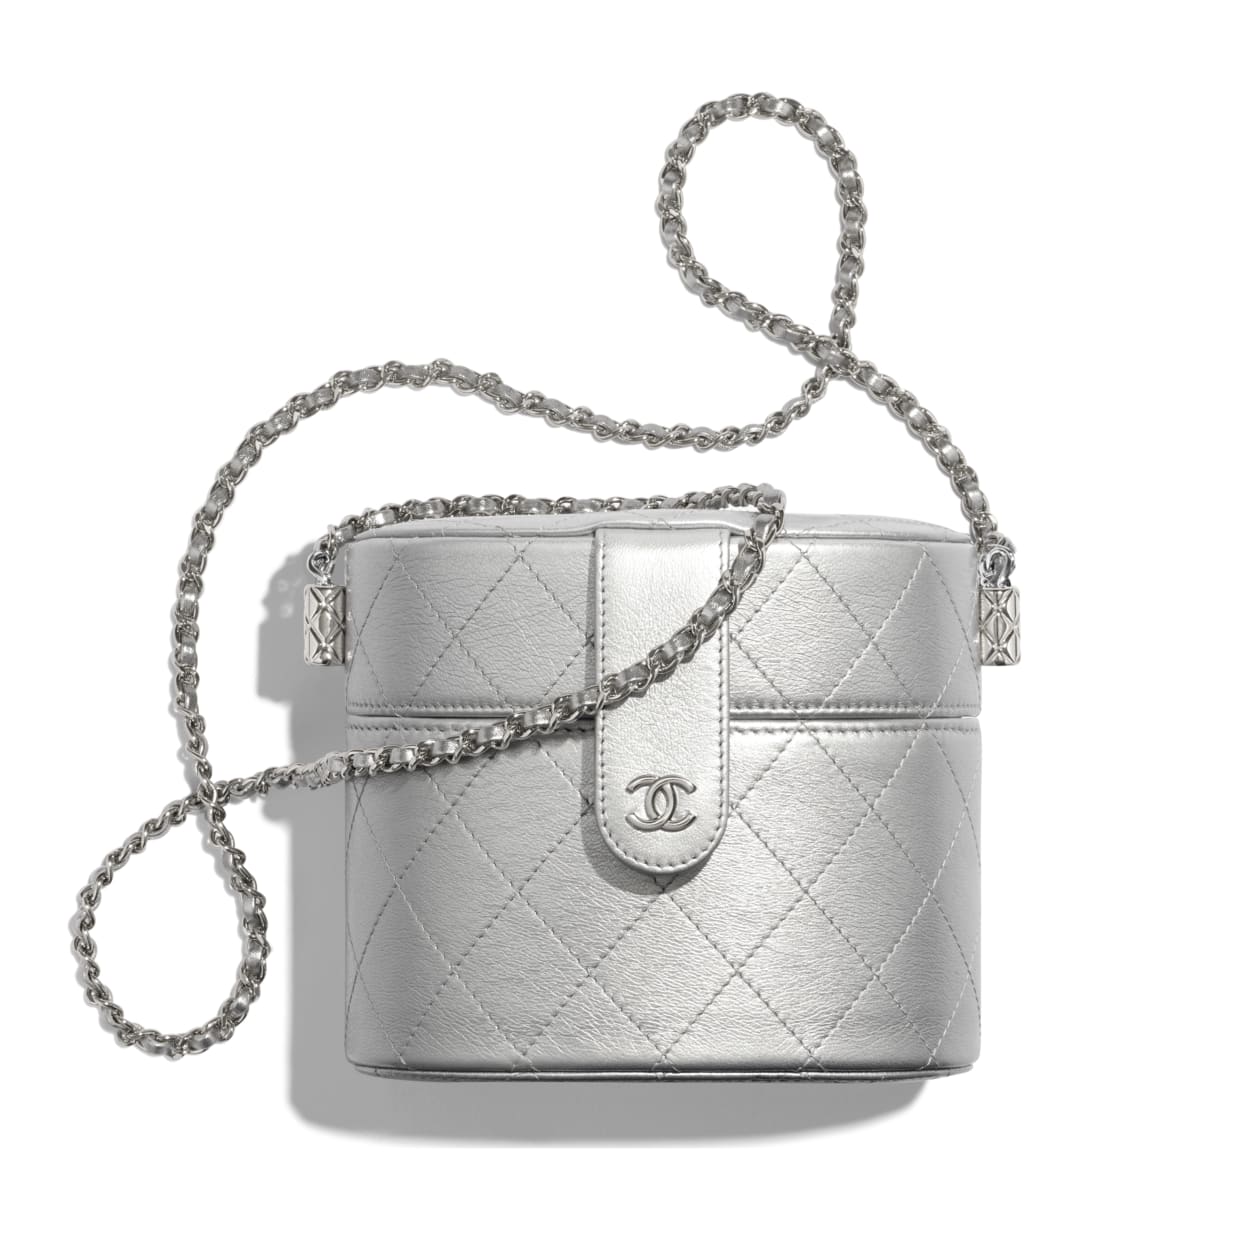 Chanel Métiers d'Art Pre-Fall 2020 Small Leather Goods Collection - Spotted  Fashion